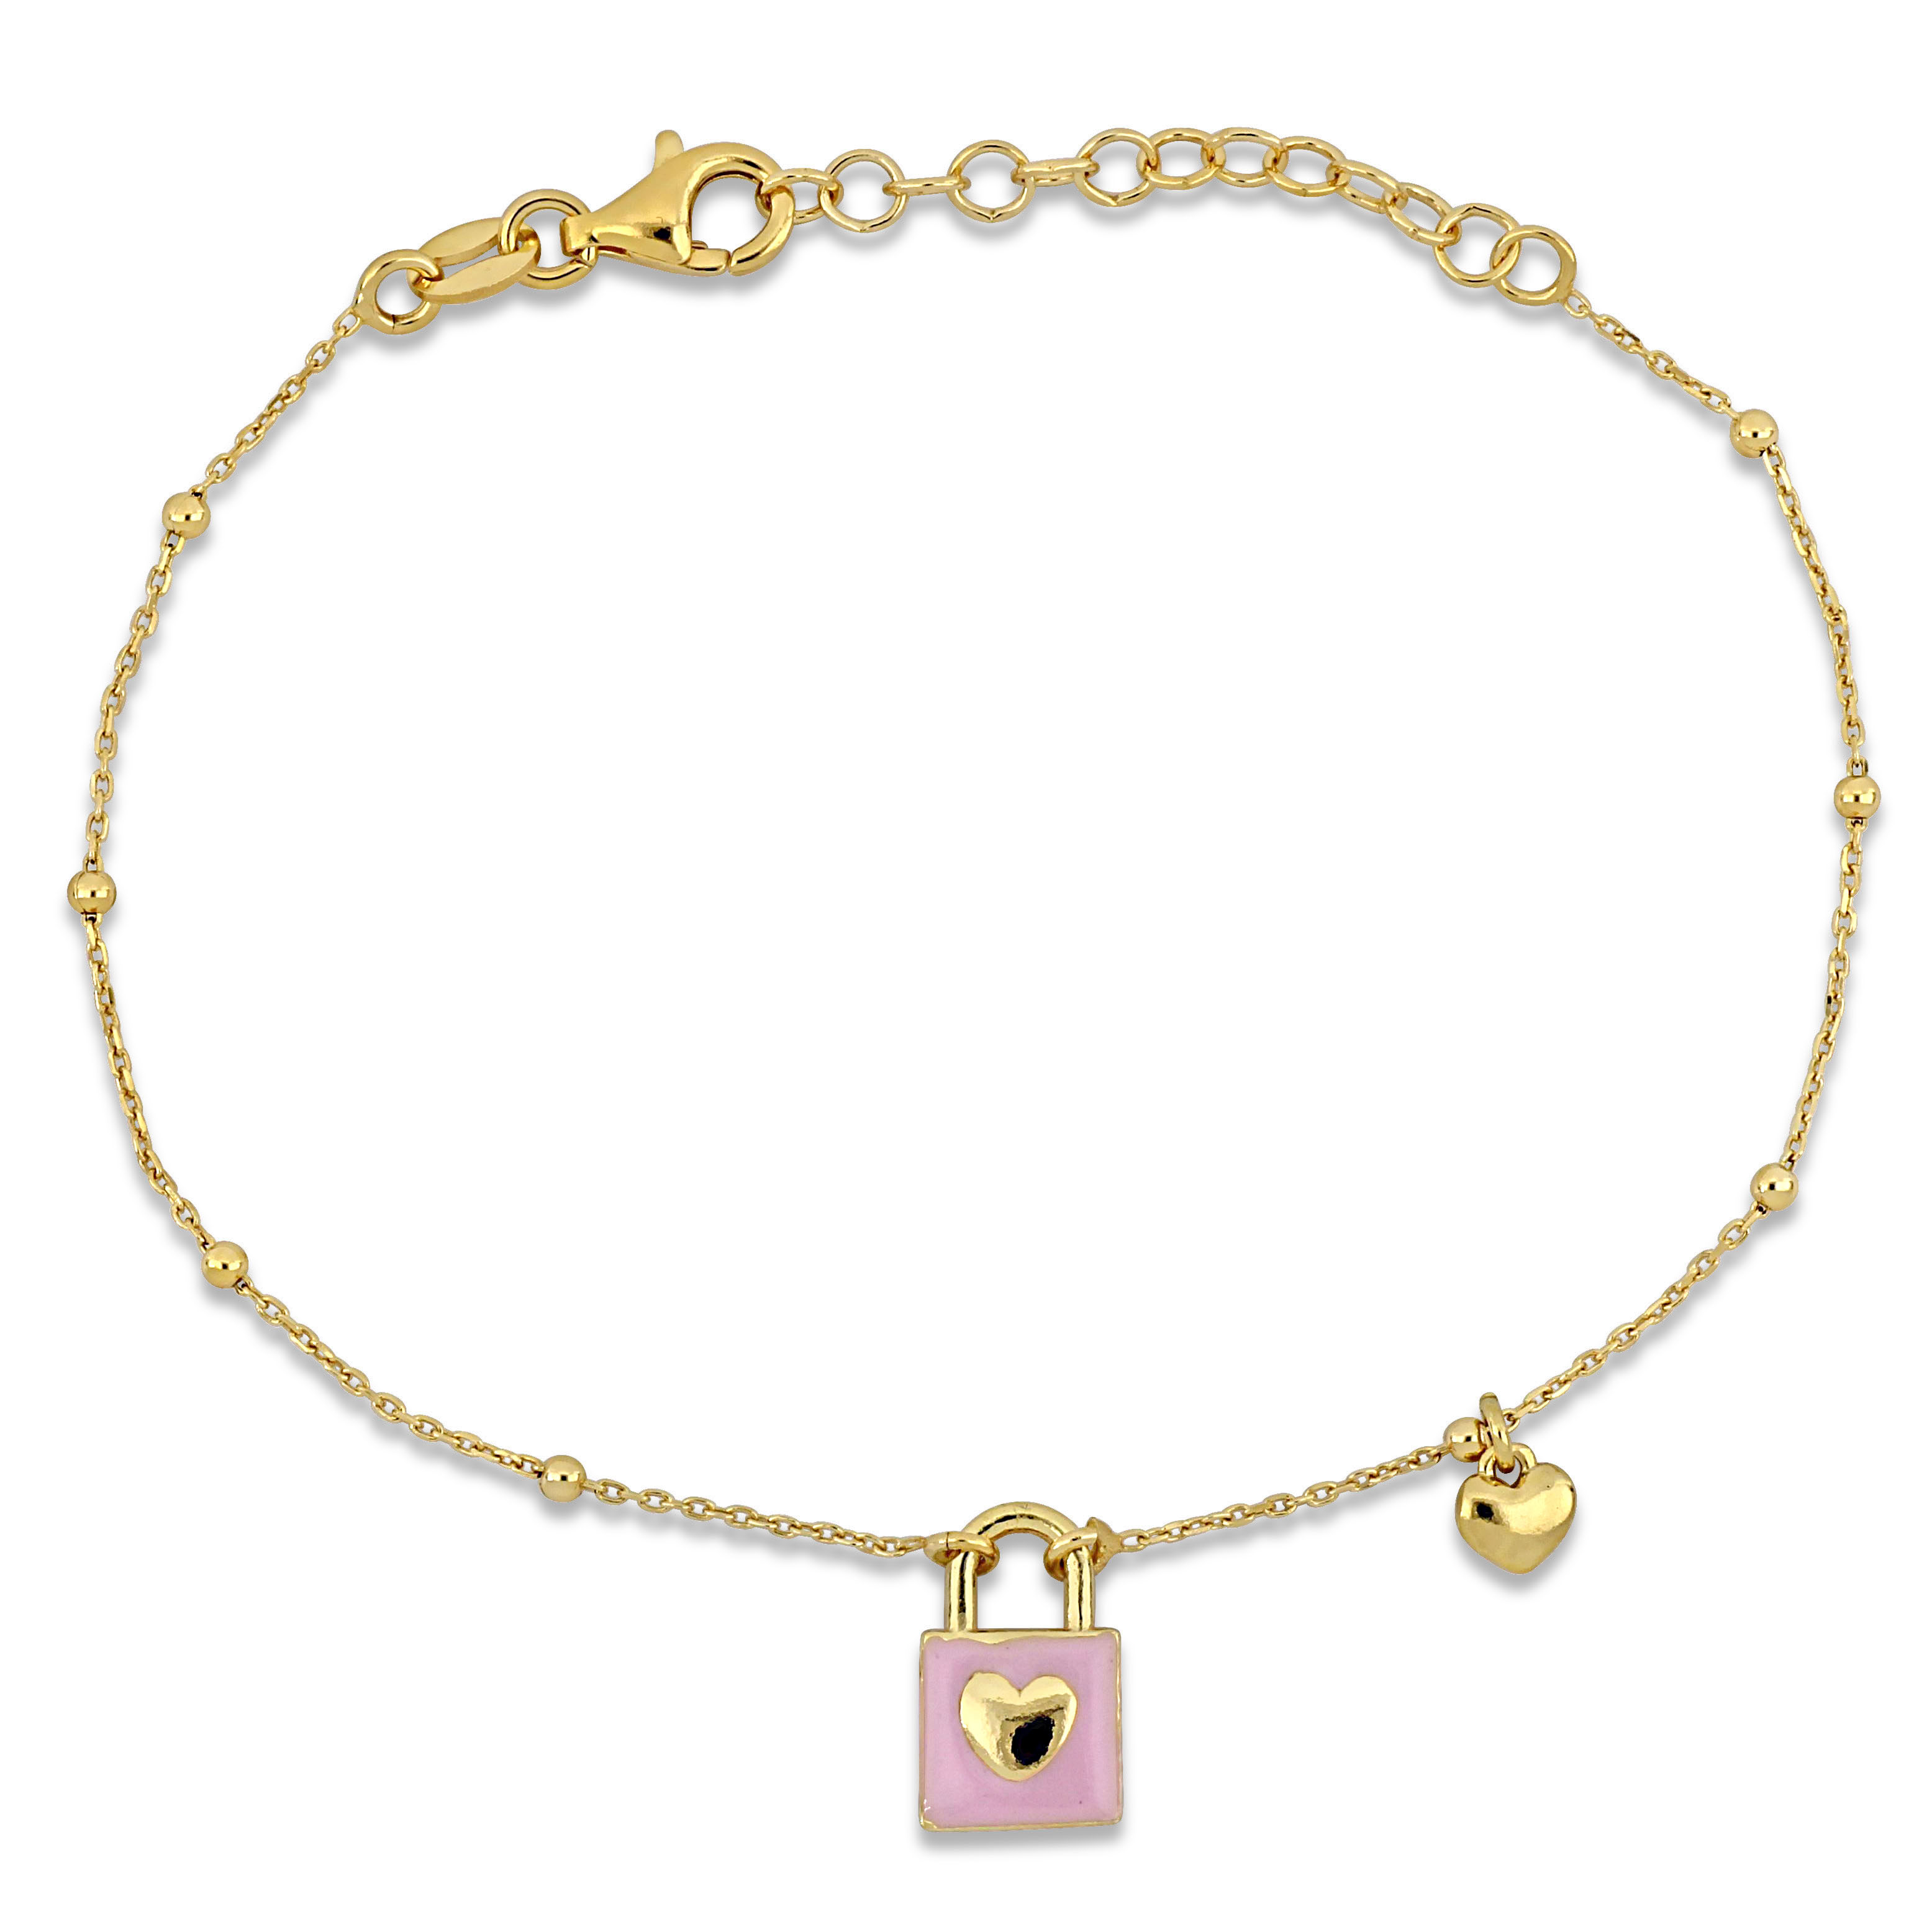 Pink Enamel Lock and Heart Charm Bracelet in Yellow Plated Sterling Silver- 7+1 in.